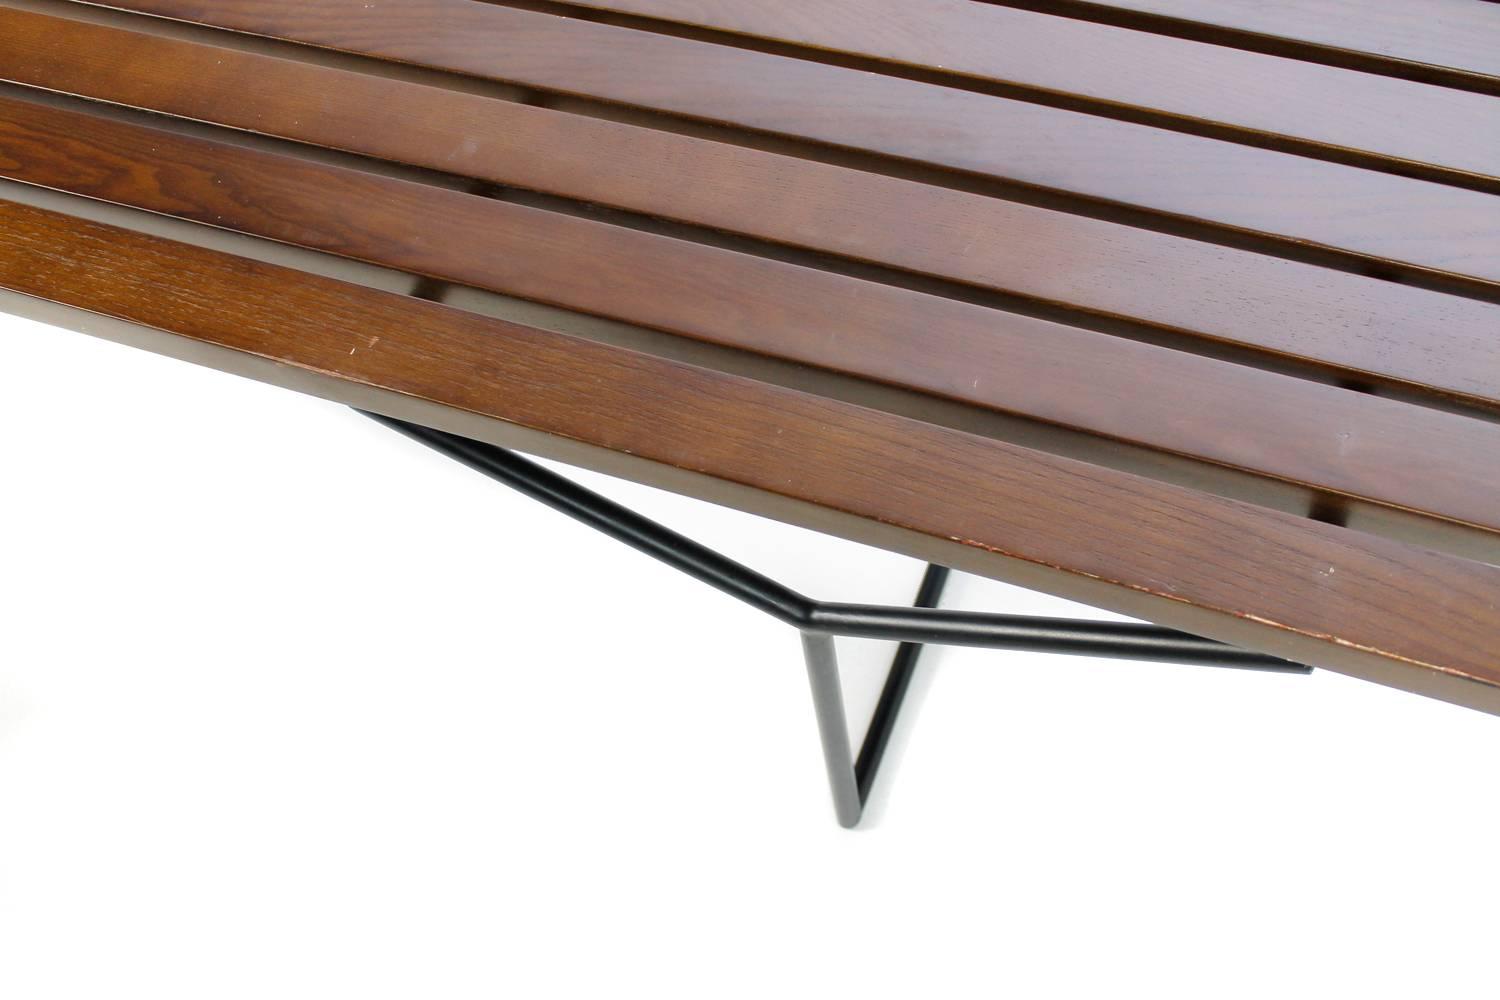 Metal Mid-Century Modern Bench Attributed to Harry Bertoia, Dark Stained Beech Wood